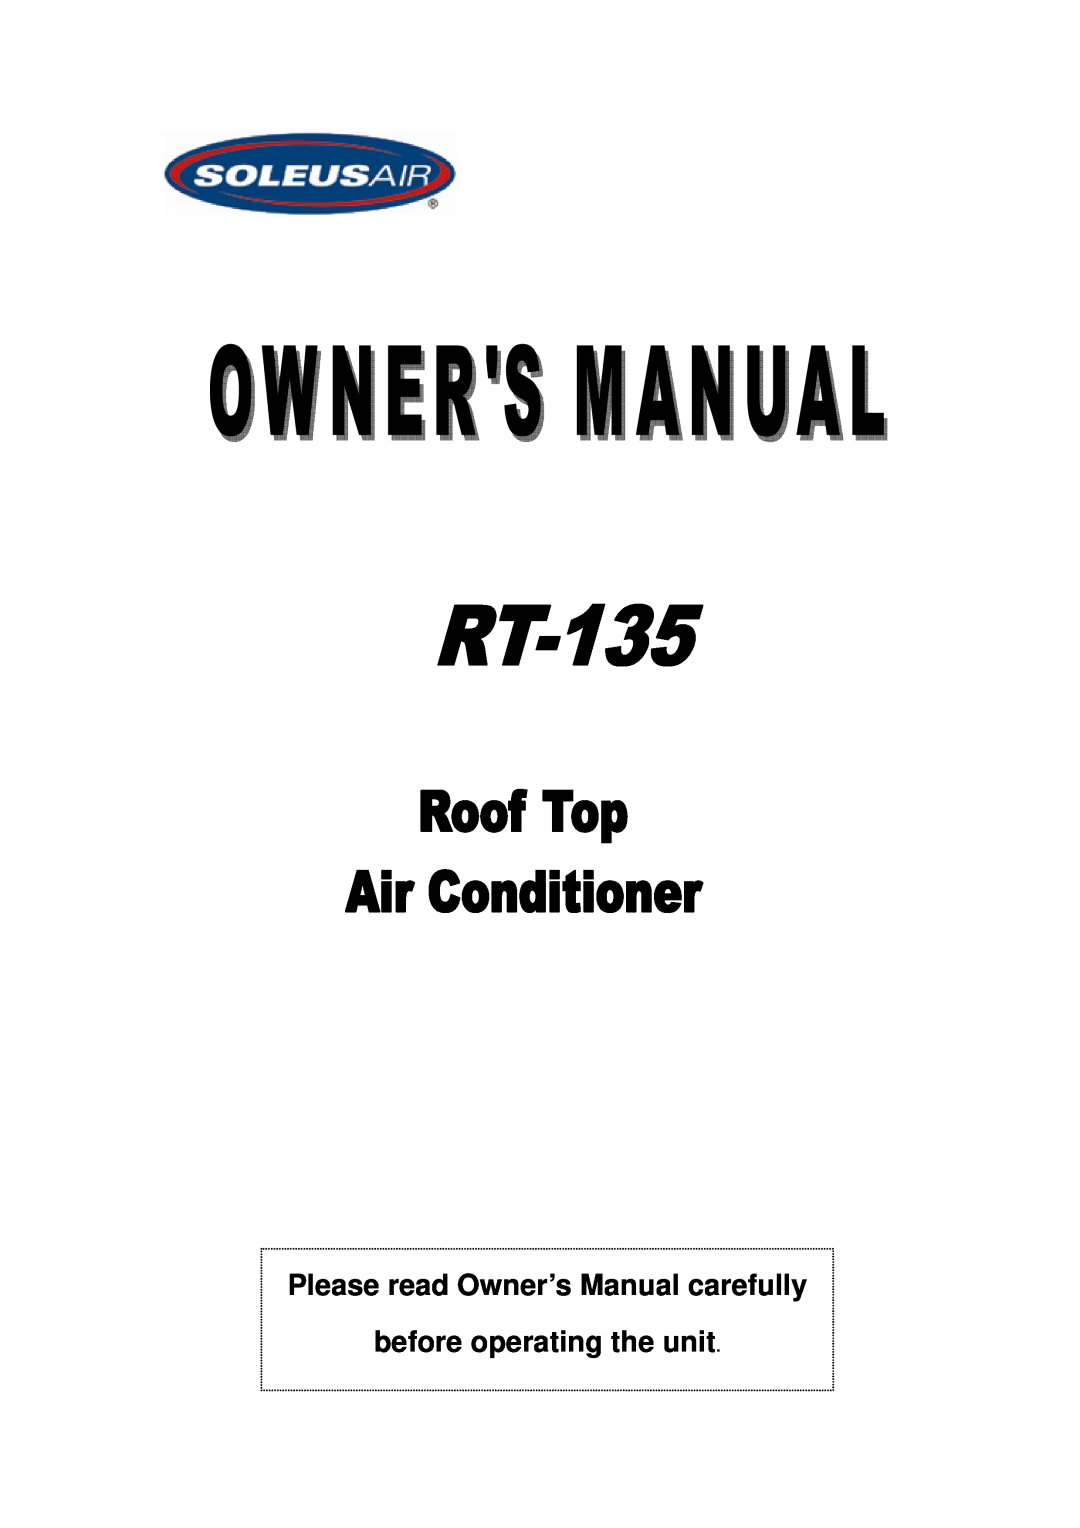 Soleus Air air-condition owner manual before operating the unit 